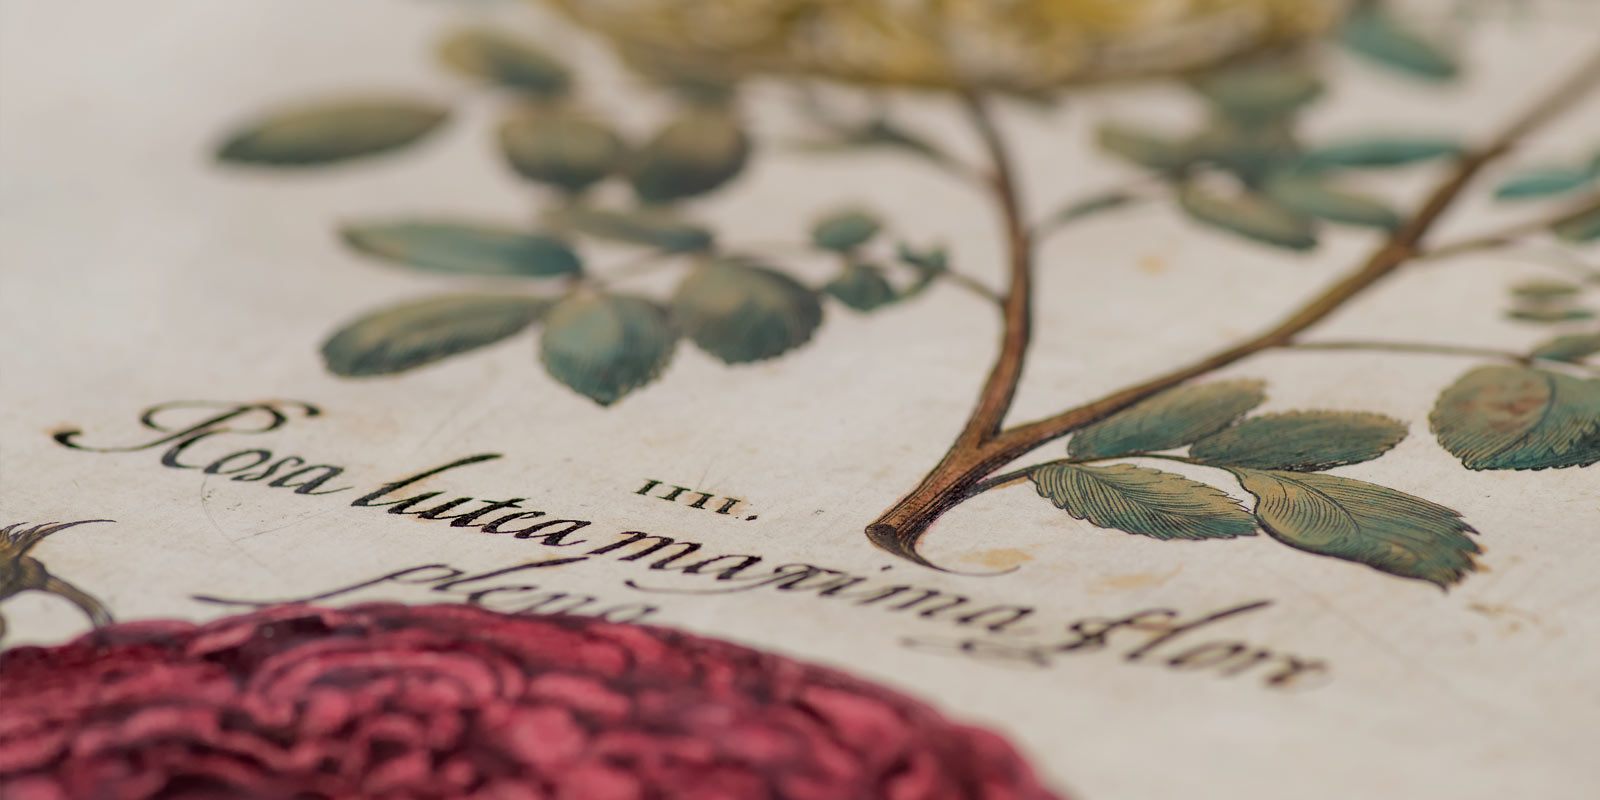 News : The Royal Botanical Garden presents its new Digital Library with more than 7.500 publications...  Another digital library powered by Limb Gallery.